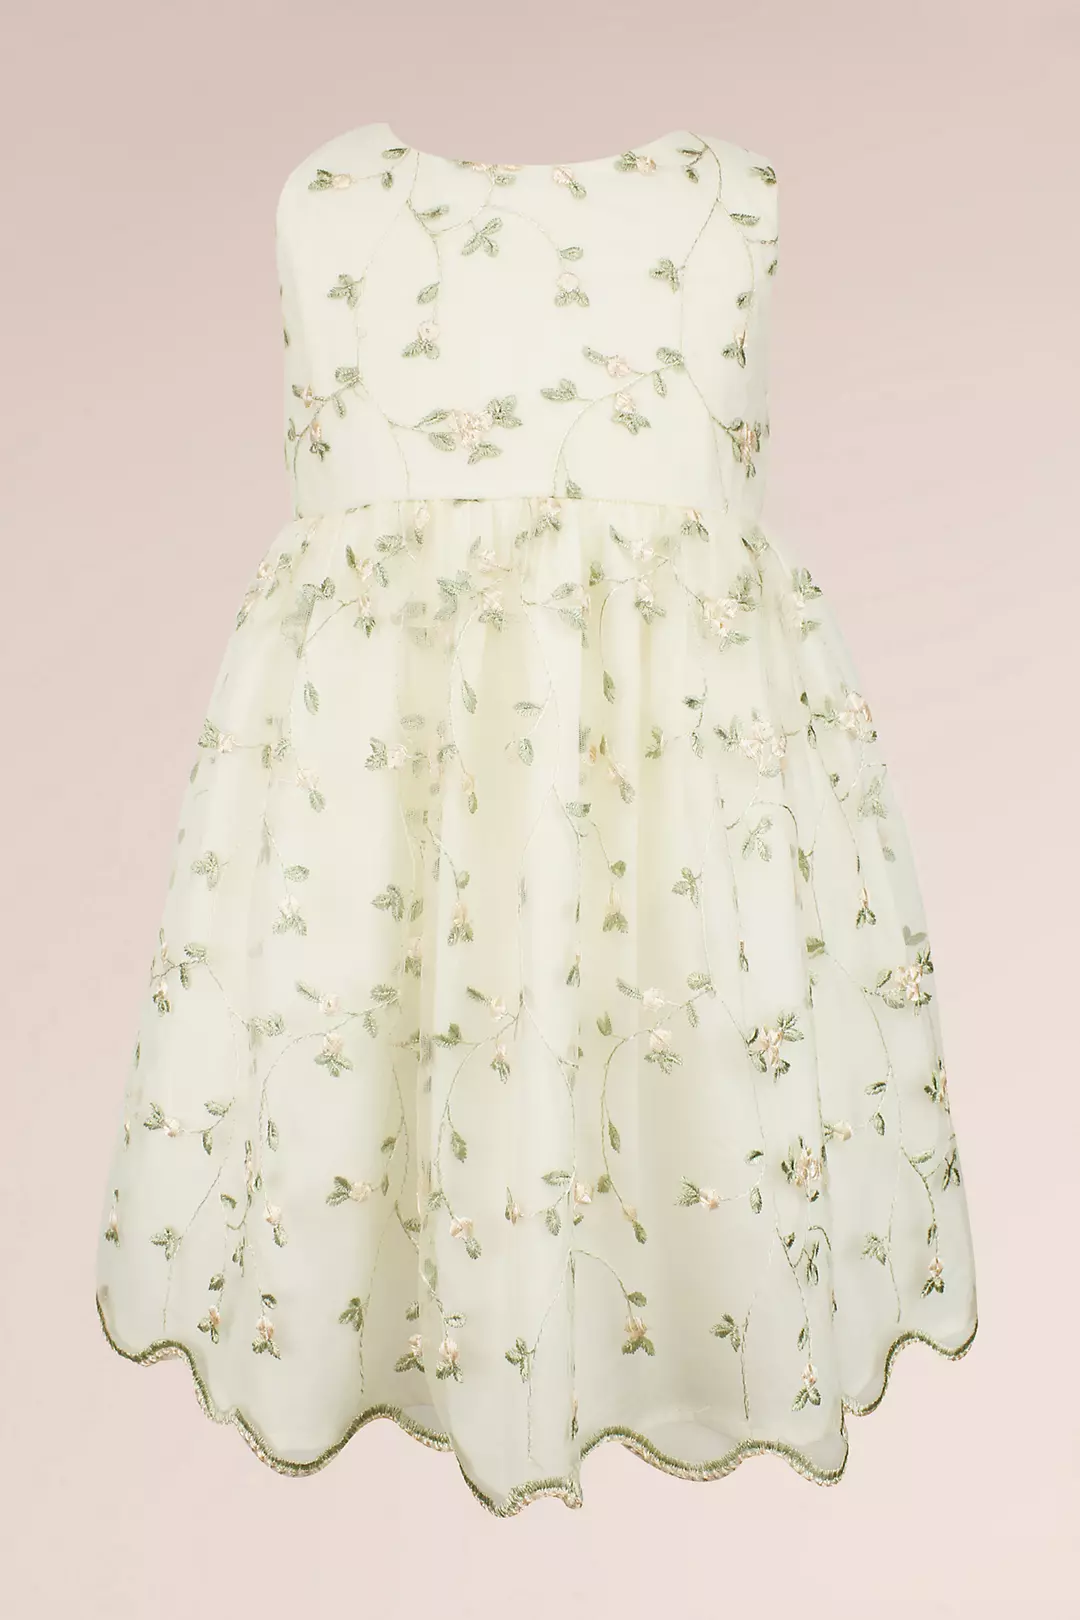 Embroidered Budding Blooms Flower Girl Dress Image